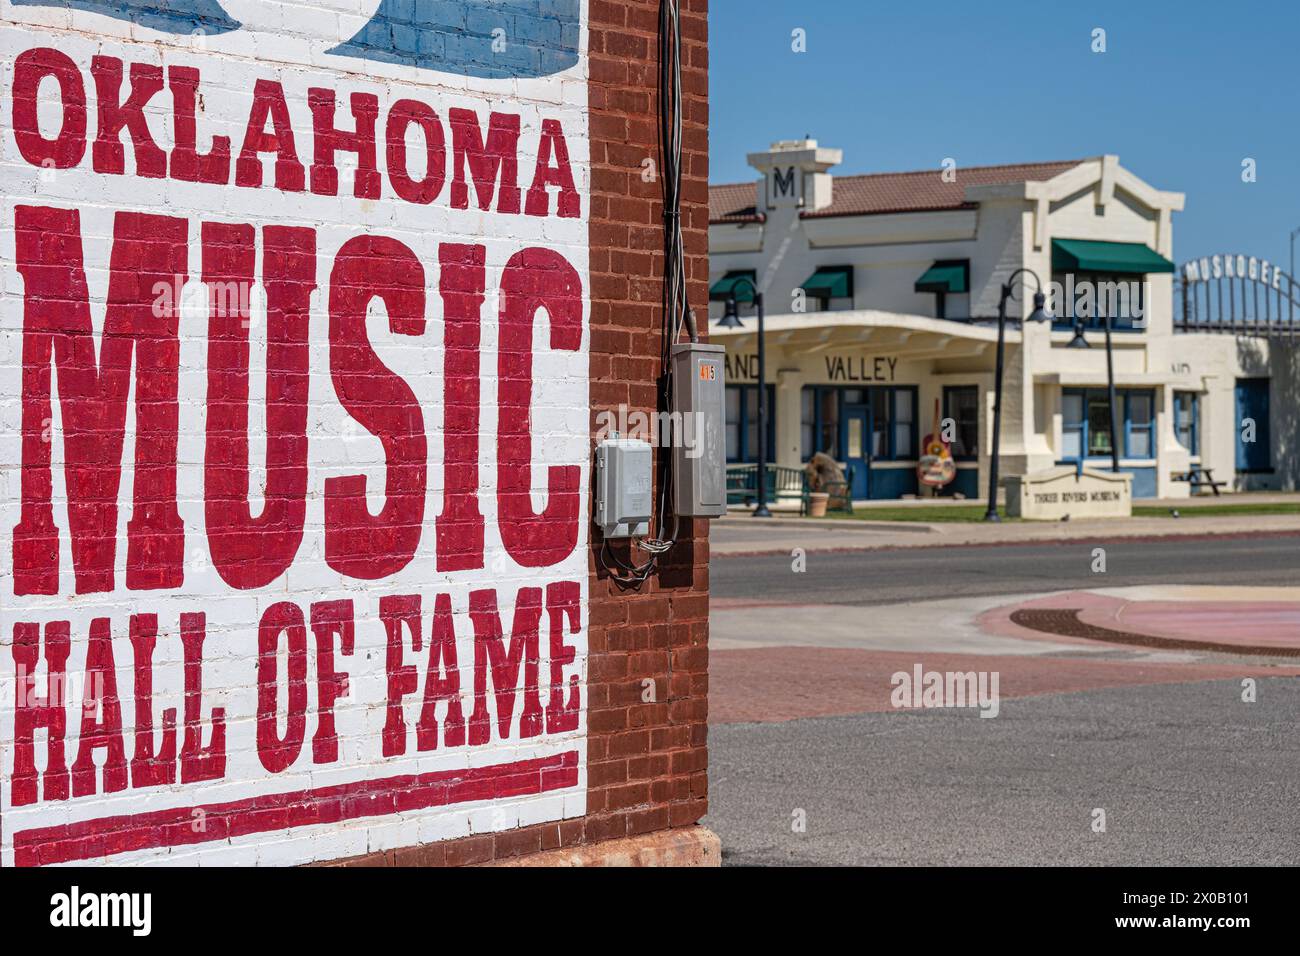 Oklahoma Music Hall of Fame e Three Rivers Museum (nel Midland Valley Railroad Depot) a Muskogee, Oklahoma's Depot District. (USA) Foto Stock